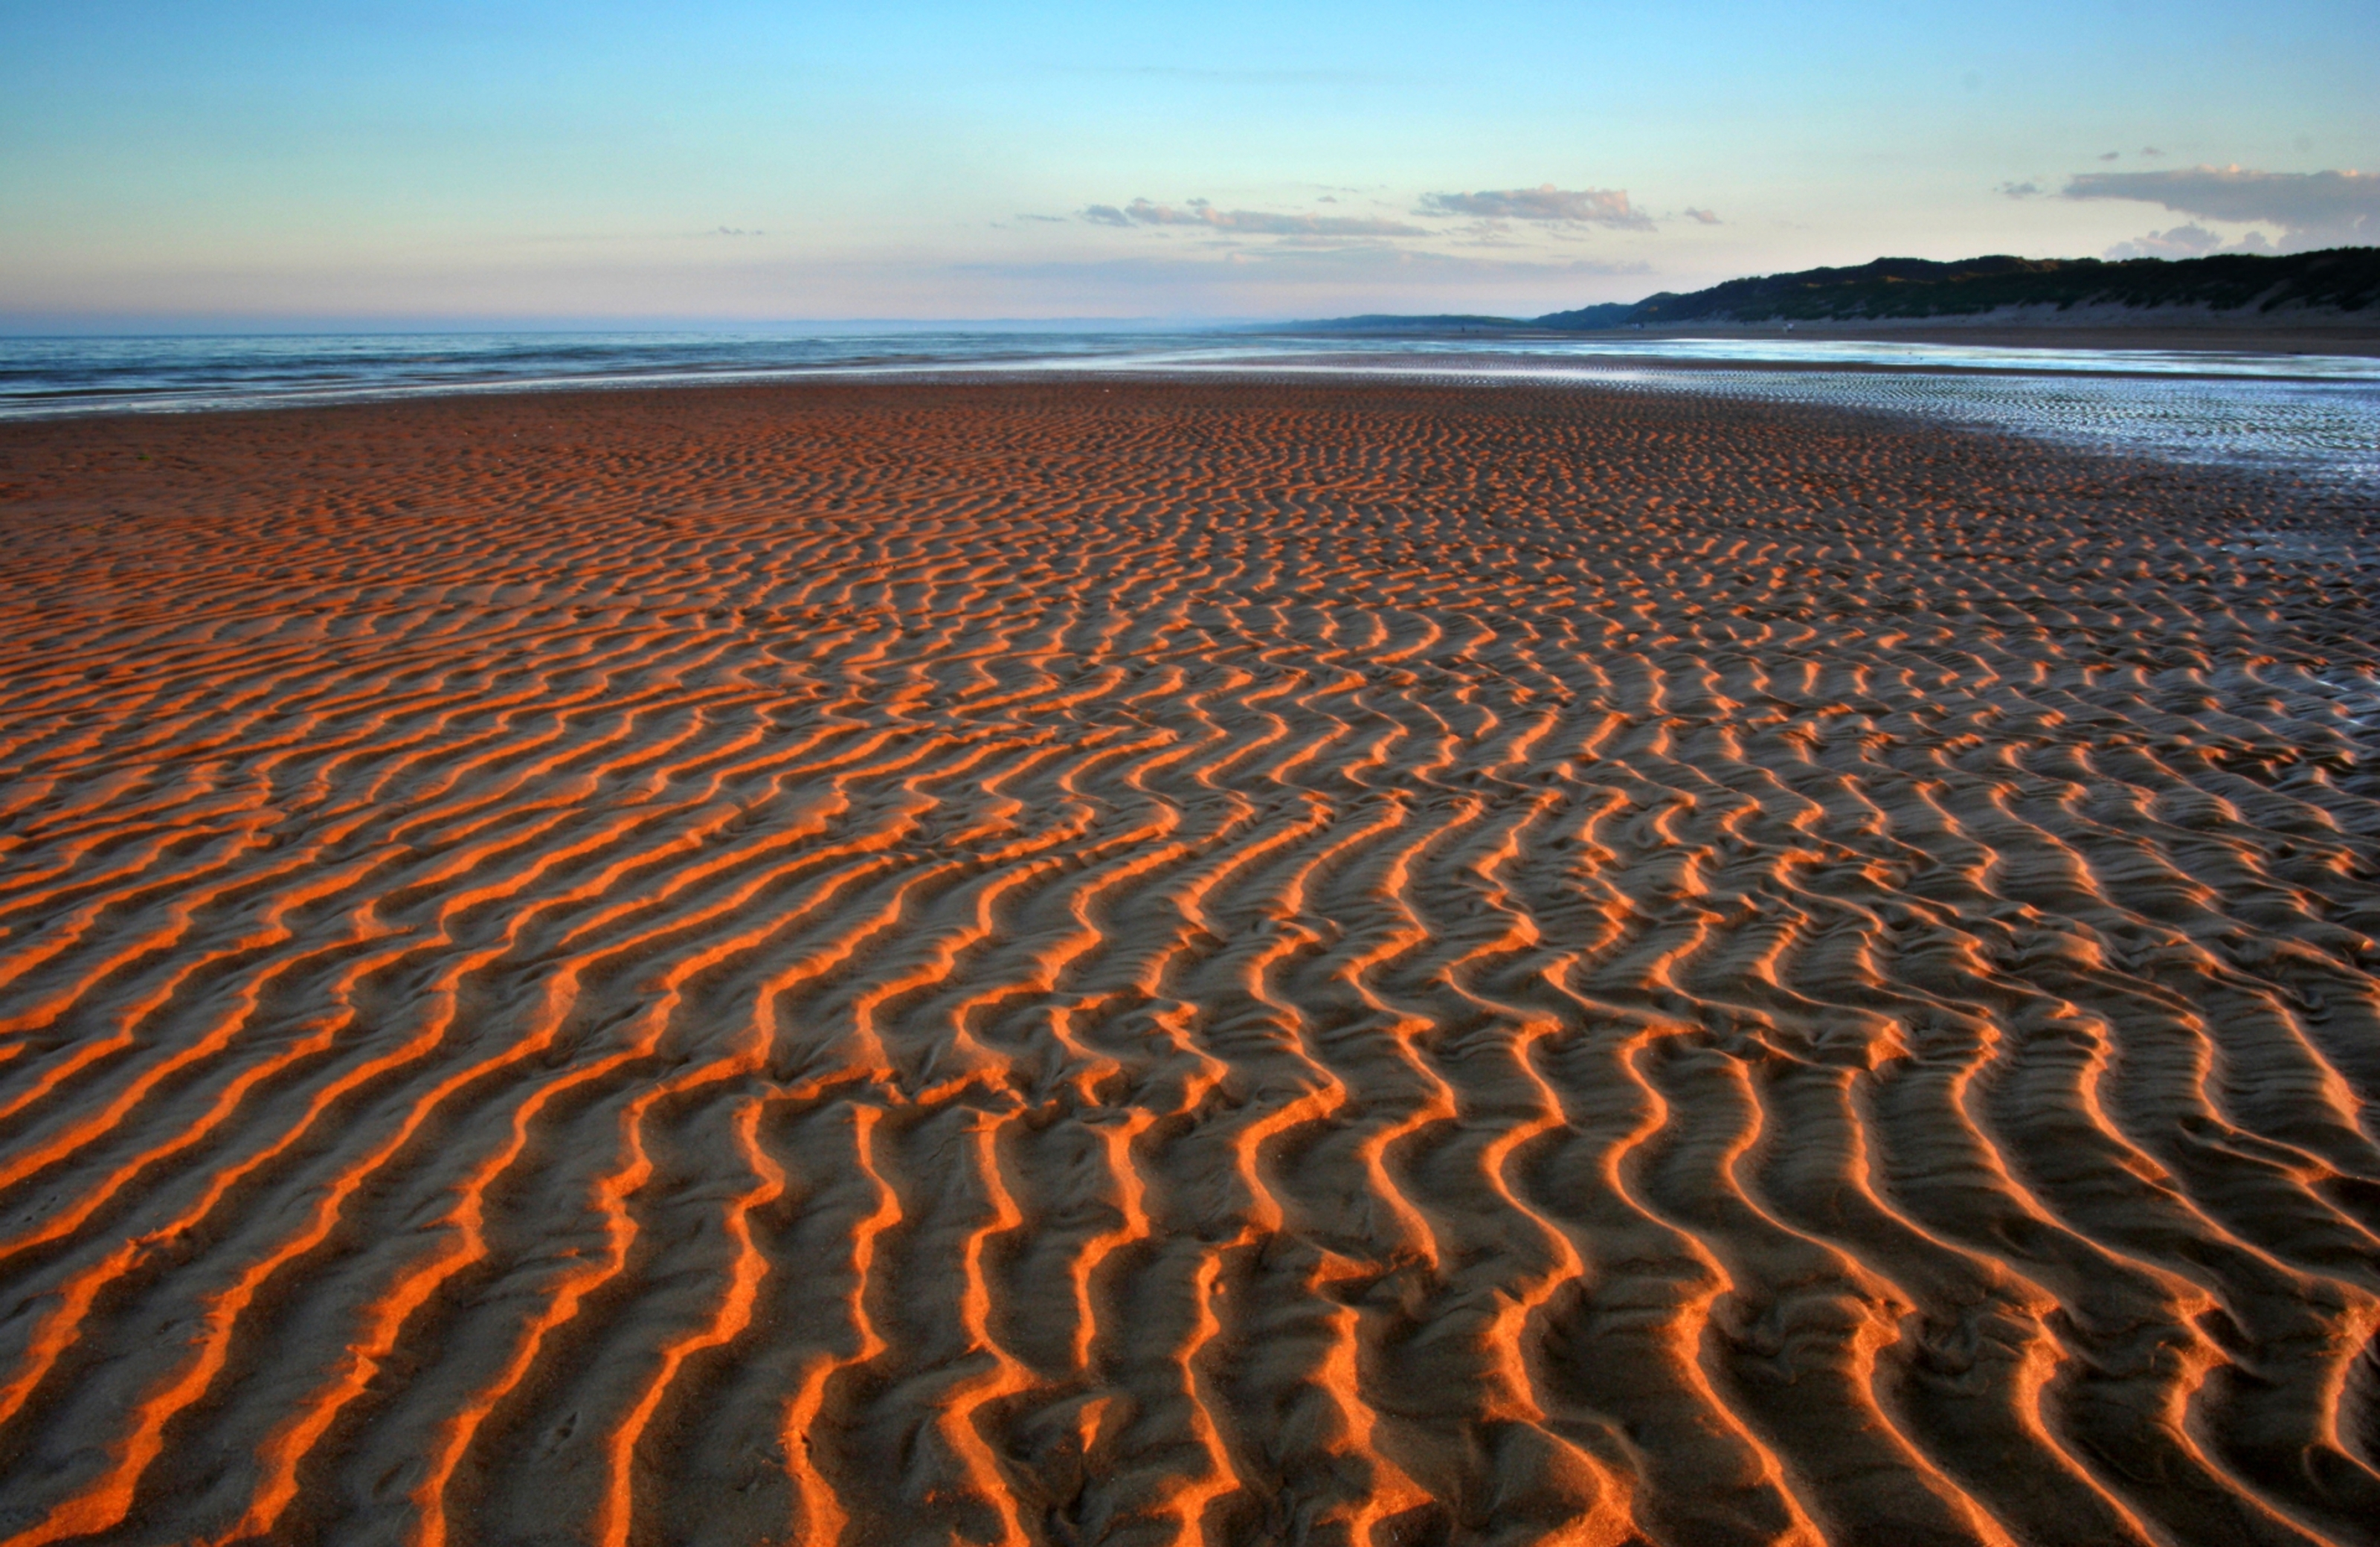 Hypnotic patterns in the sand intensified by the setting sun at Balmedie beach north of Aberdeen  (Alamy)